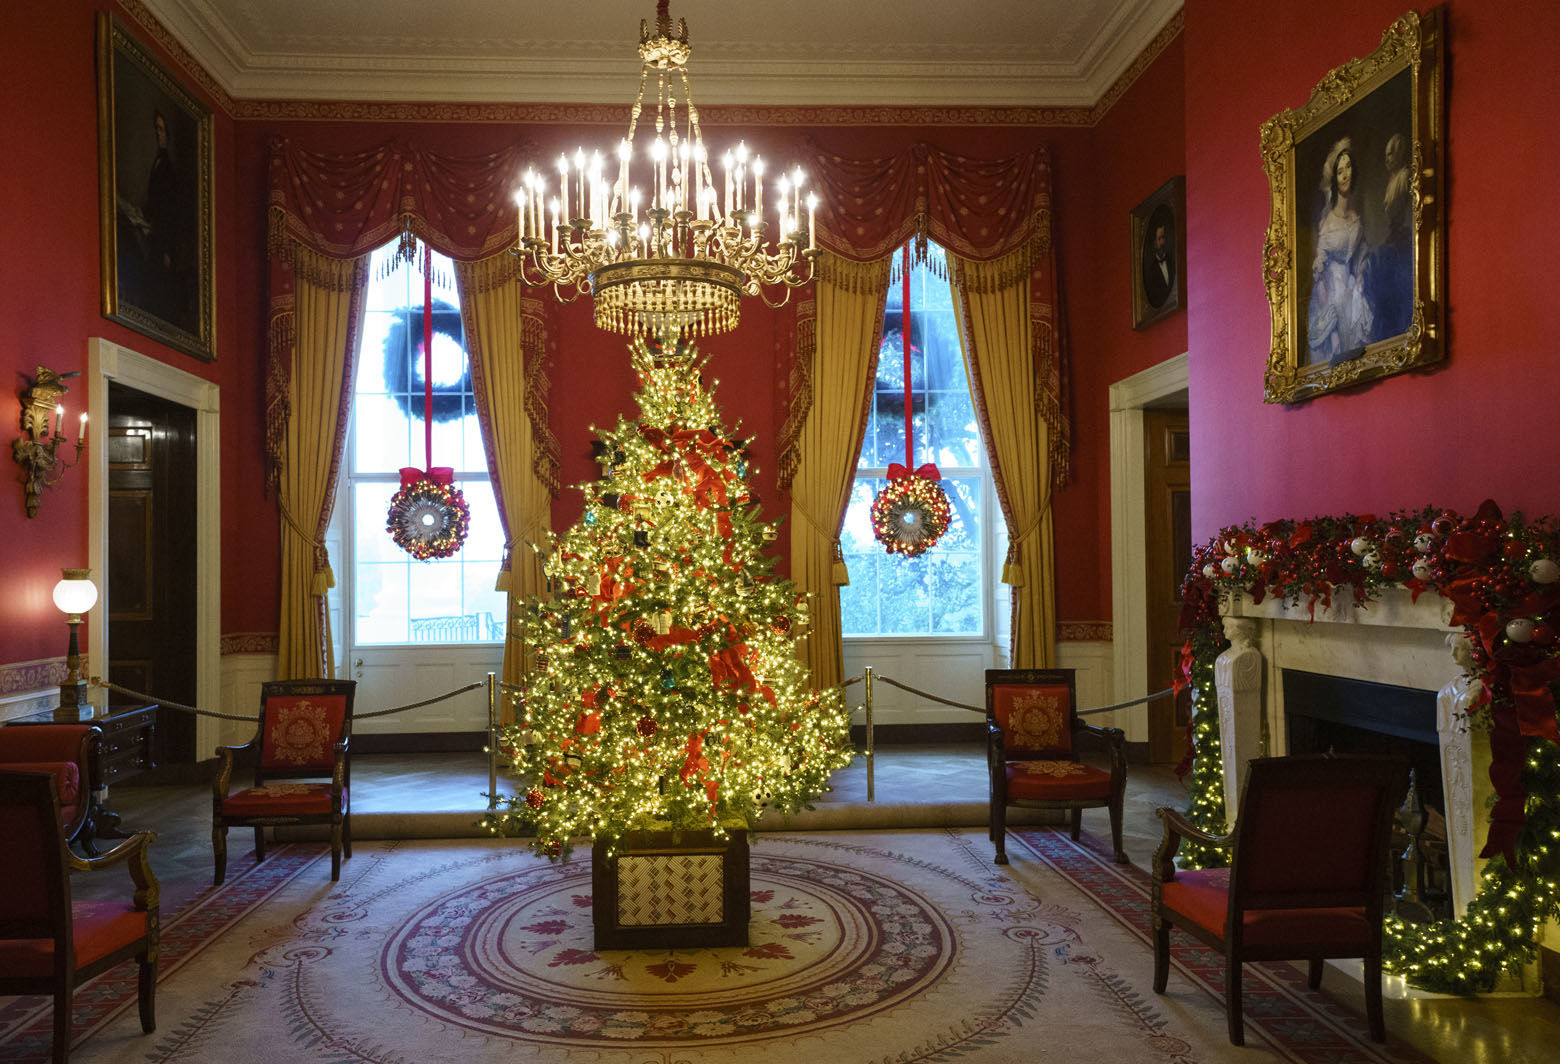 The Red Room, with the theme to celebrate America's Children, is seen during the 2018 Christmas preview at the White House in Washington, Monday, Nov. 26, 2018.  (AP Photo/Carolyn Kaster)